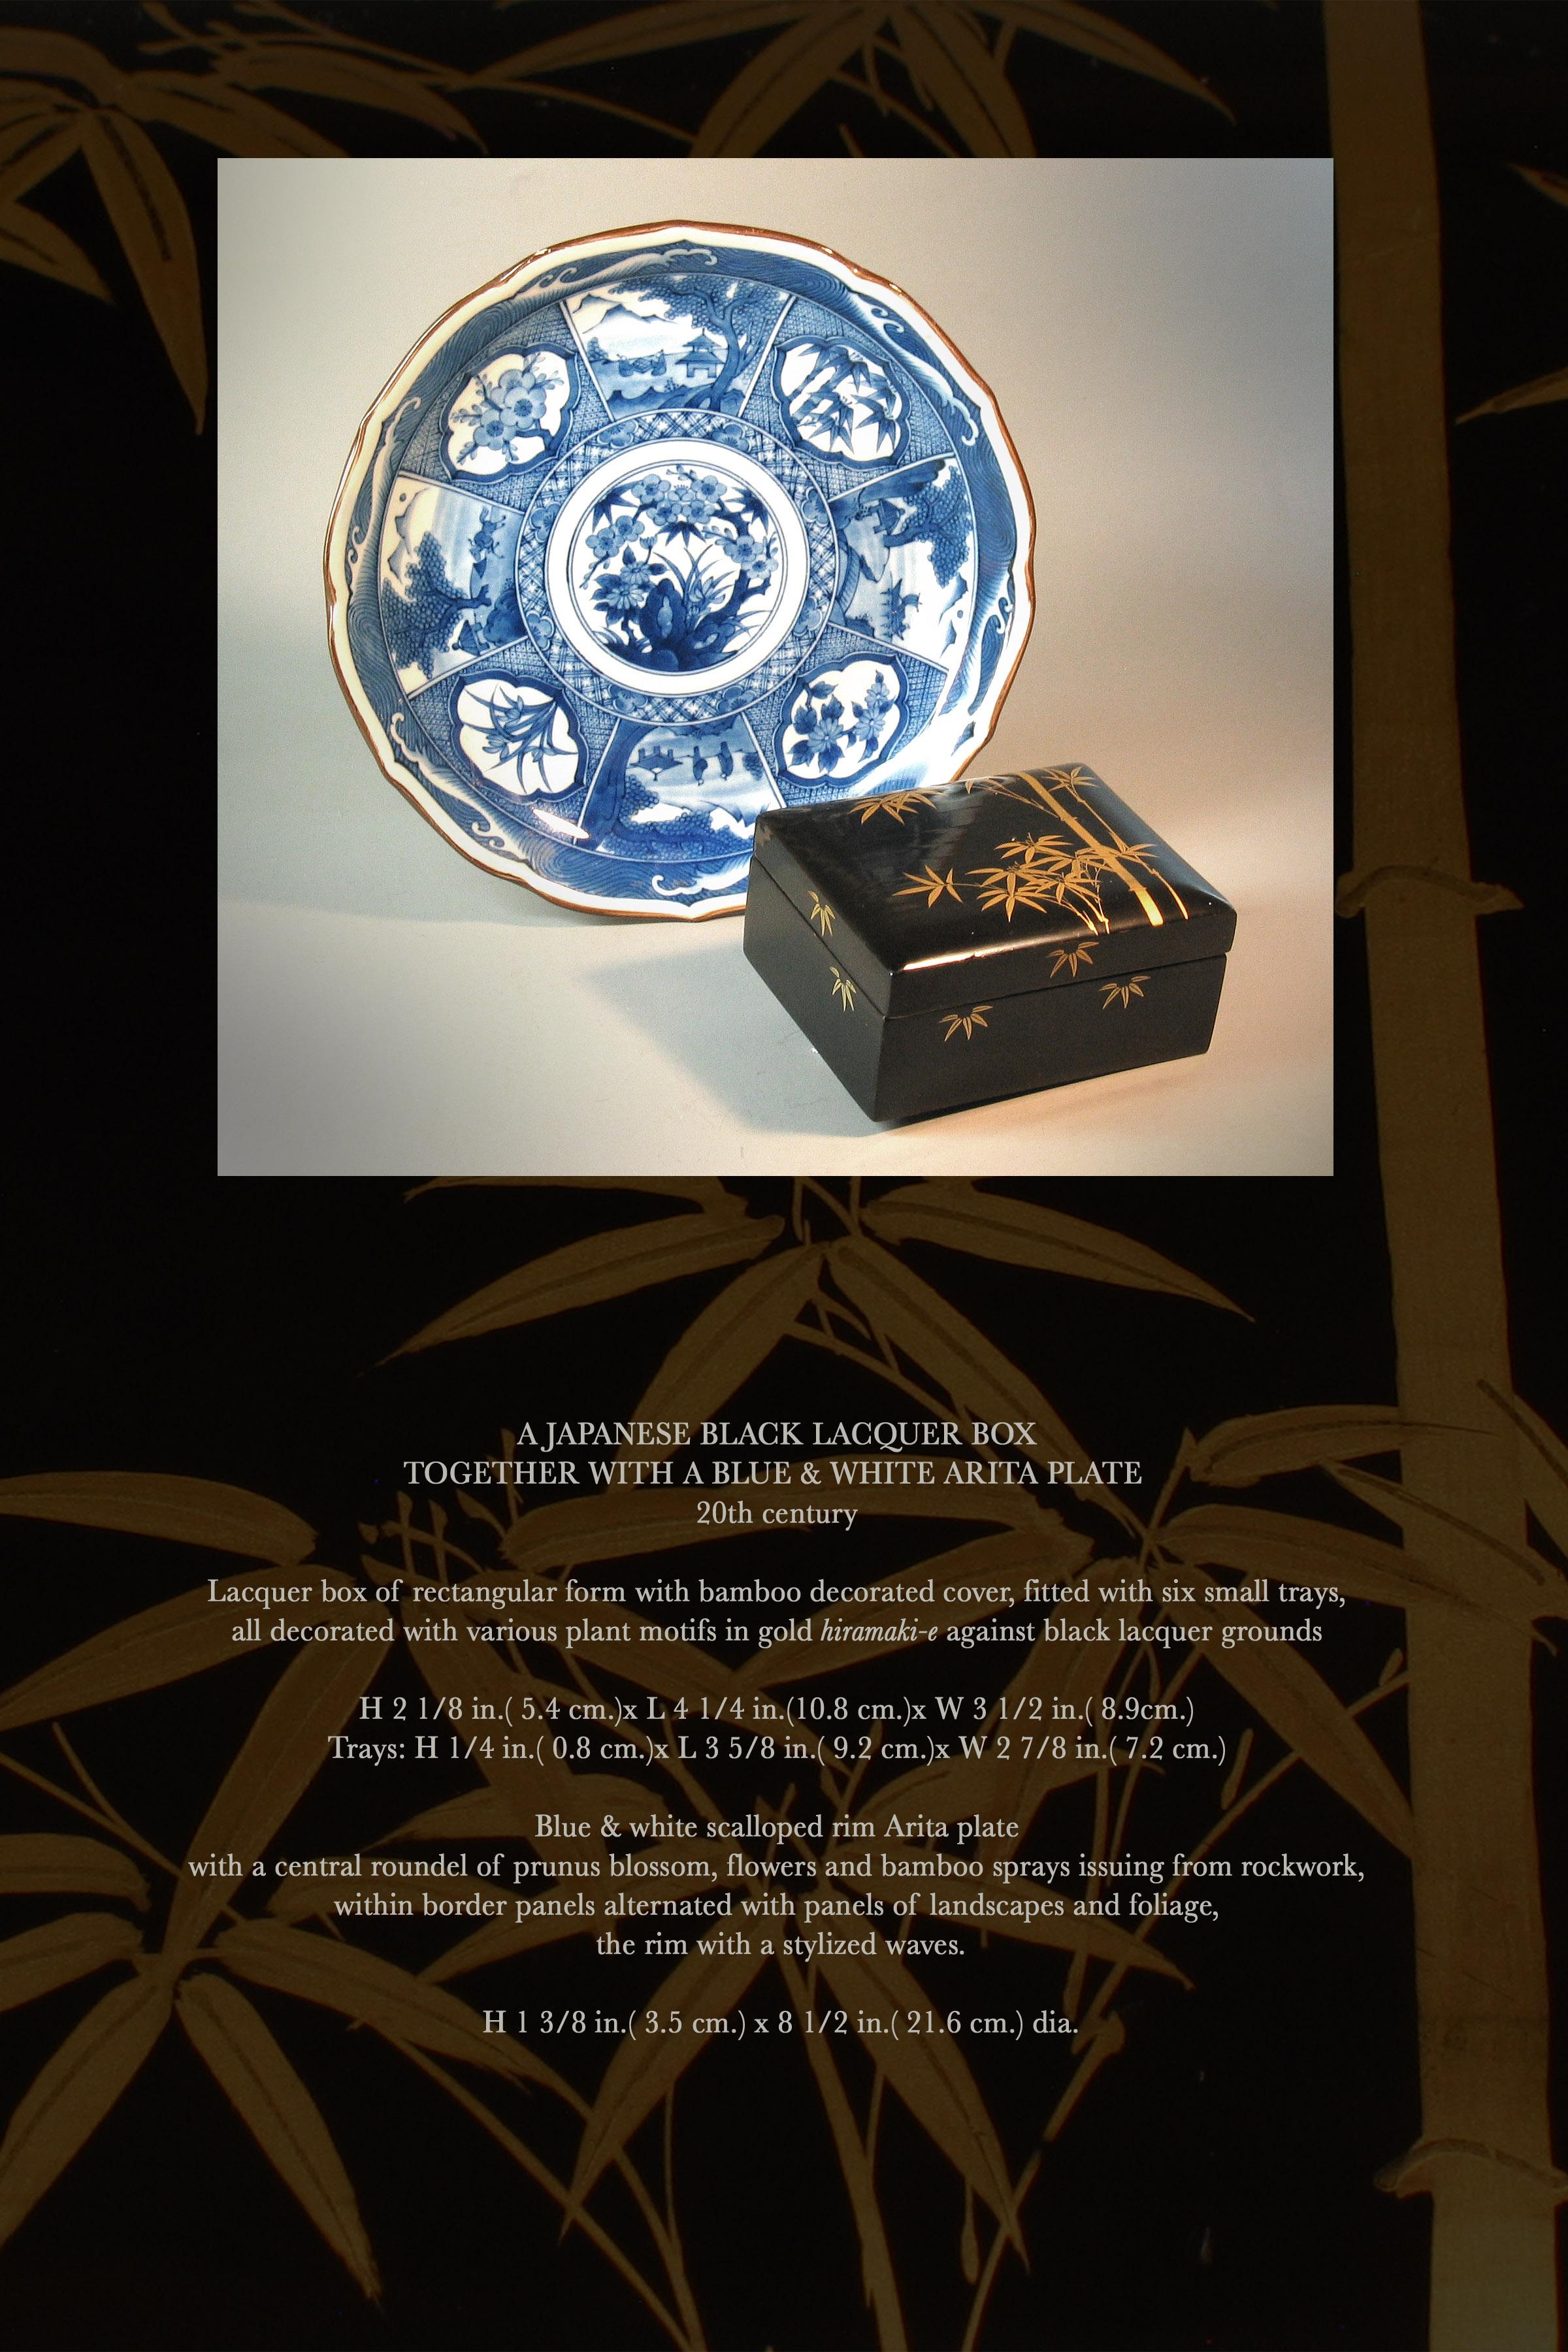 2 drawers. Drop down top. A Japanese black lacquer box
Together with a blue and white Arita plate,
20th century

Lacquer box of rectangular form with bamboo decorated cover, fitted with six small trays,
all decorated with various plant motifs